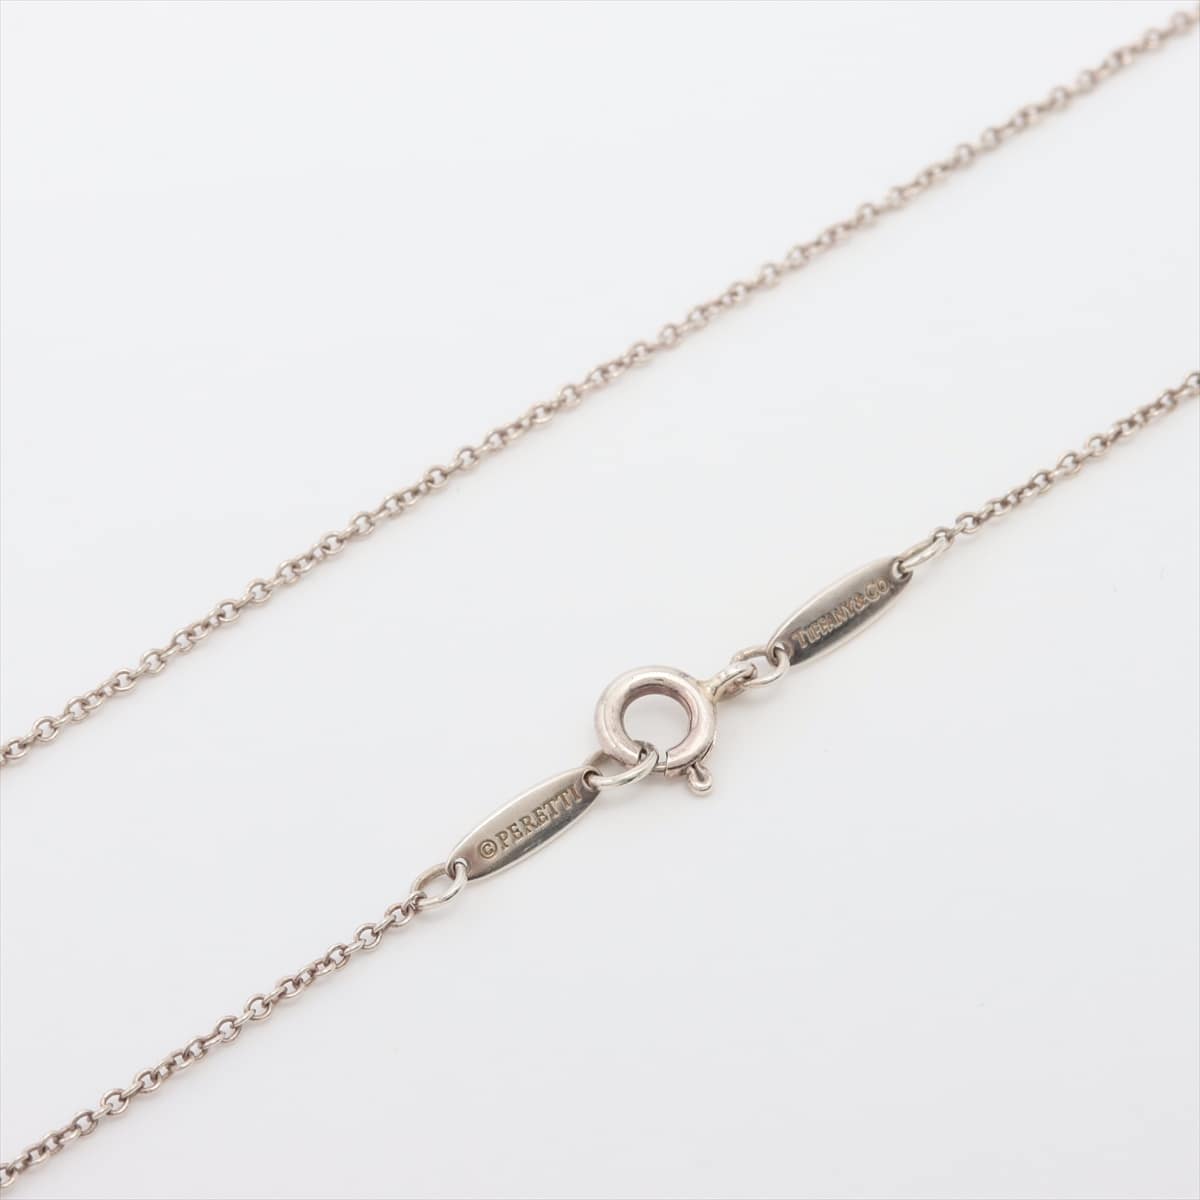 Tiffany Double Open Heart Necklace 925×750 2.5g Silver